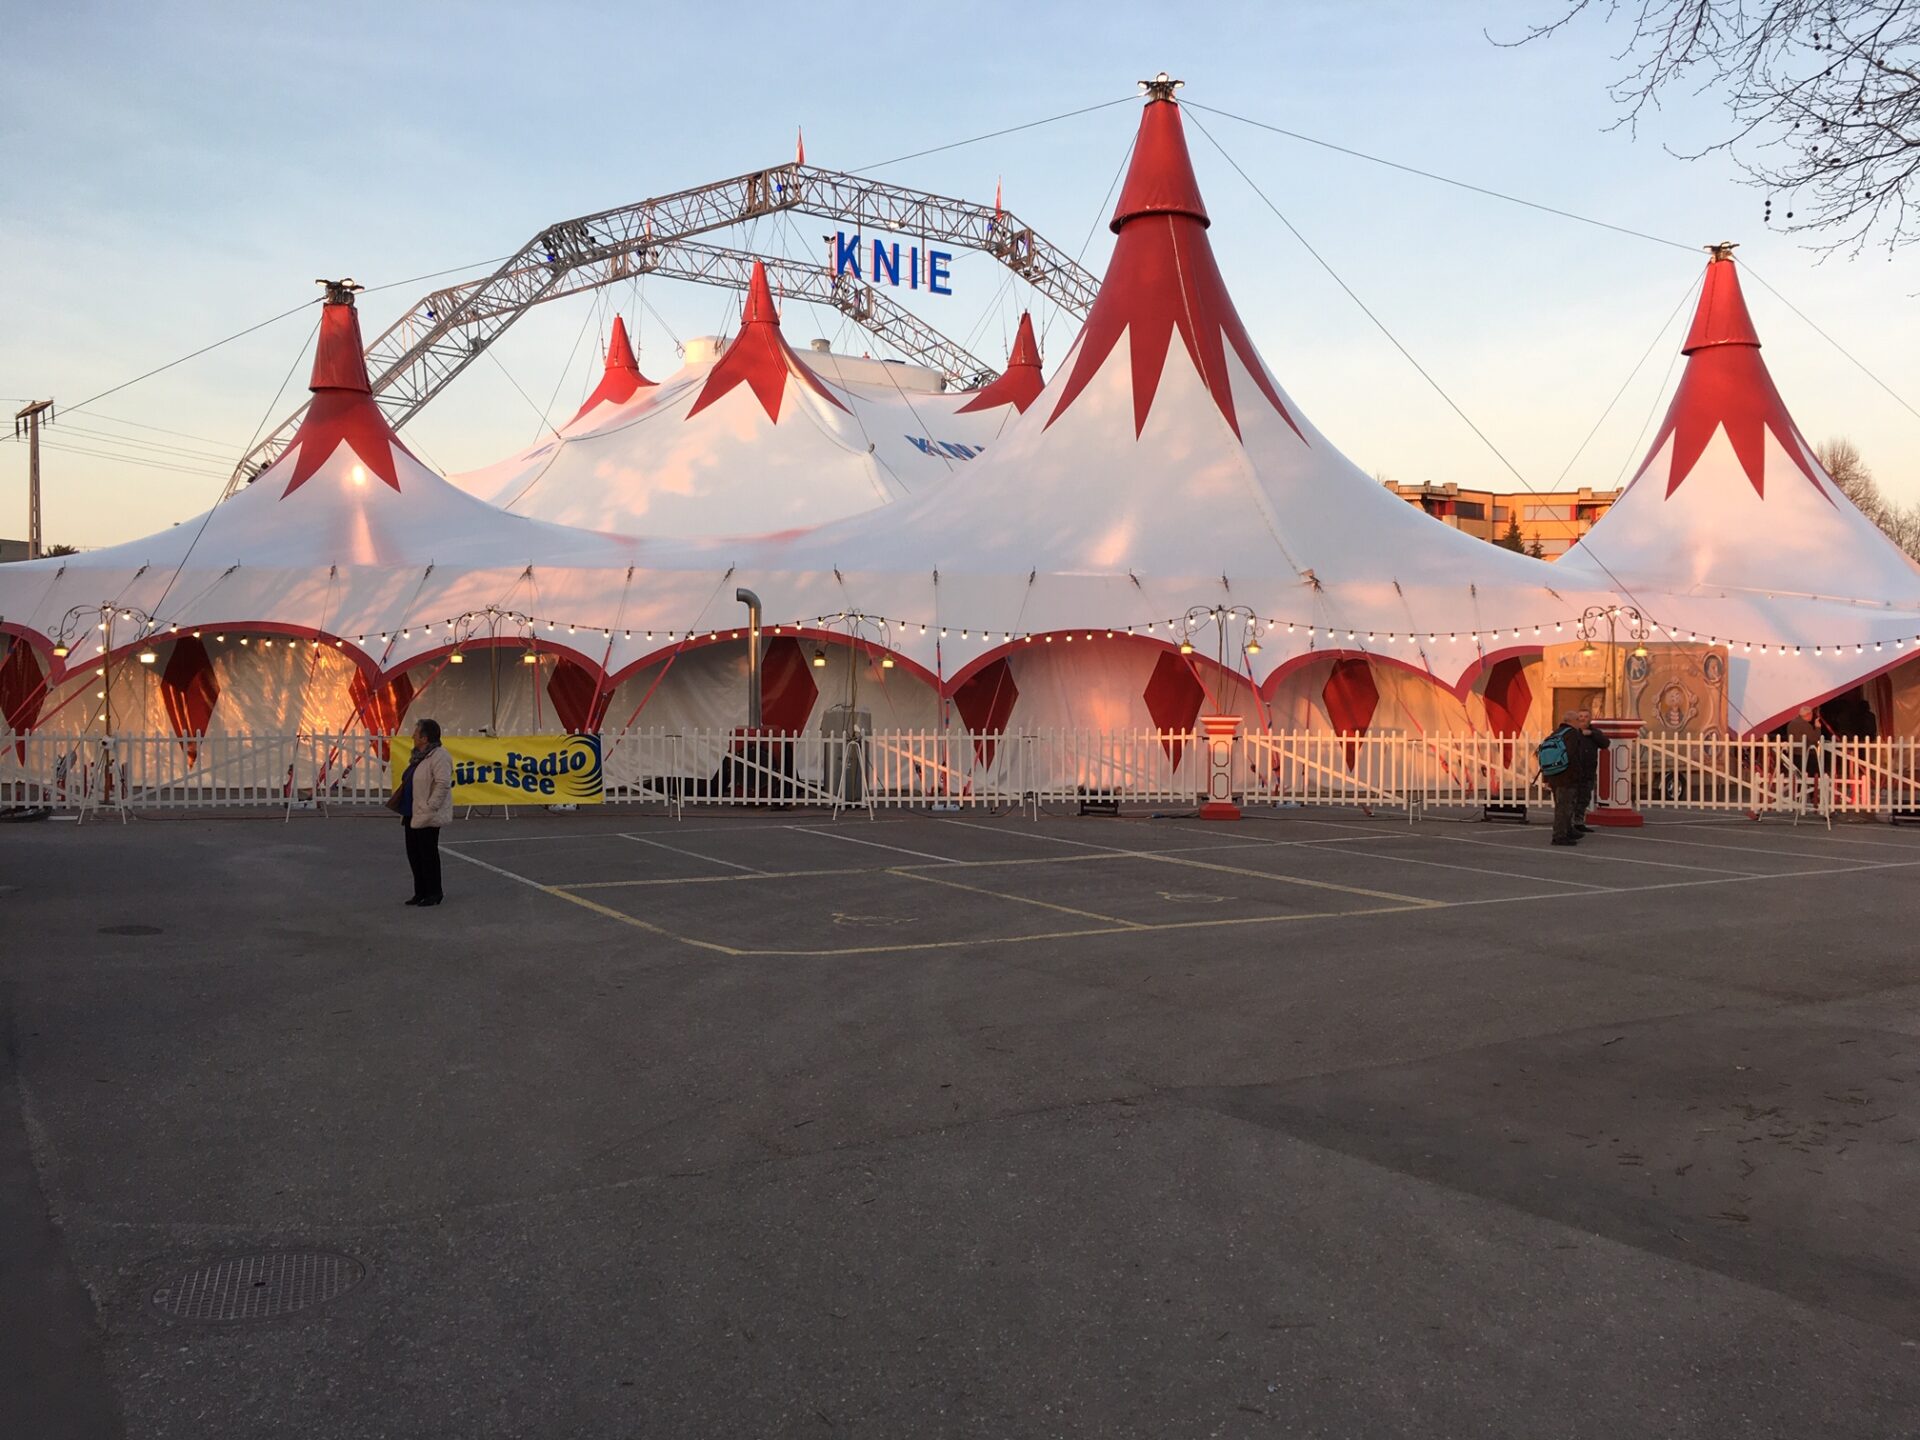 Première Zwitsers circus KNIE